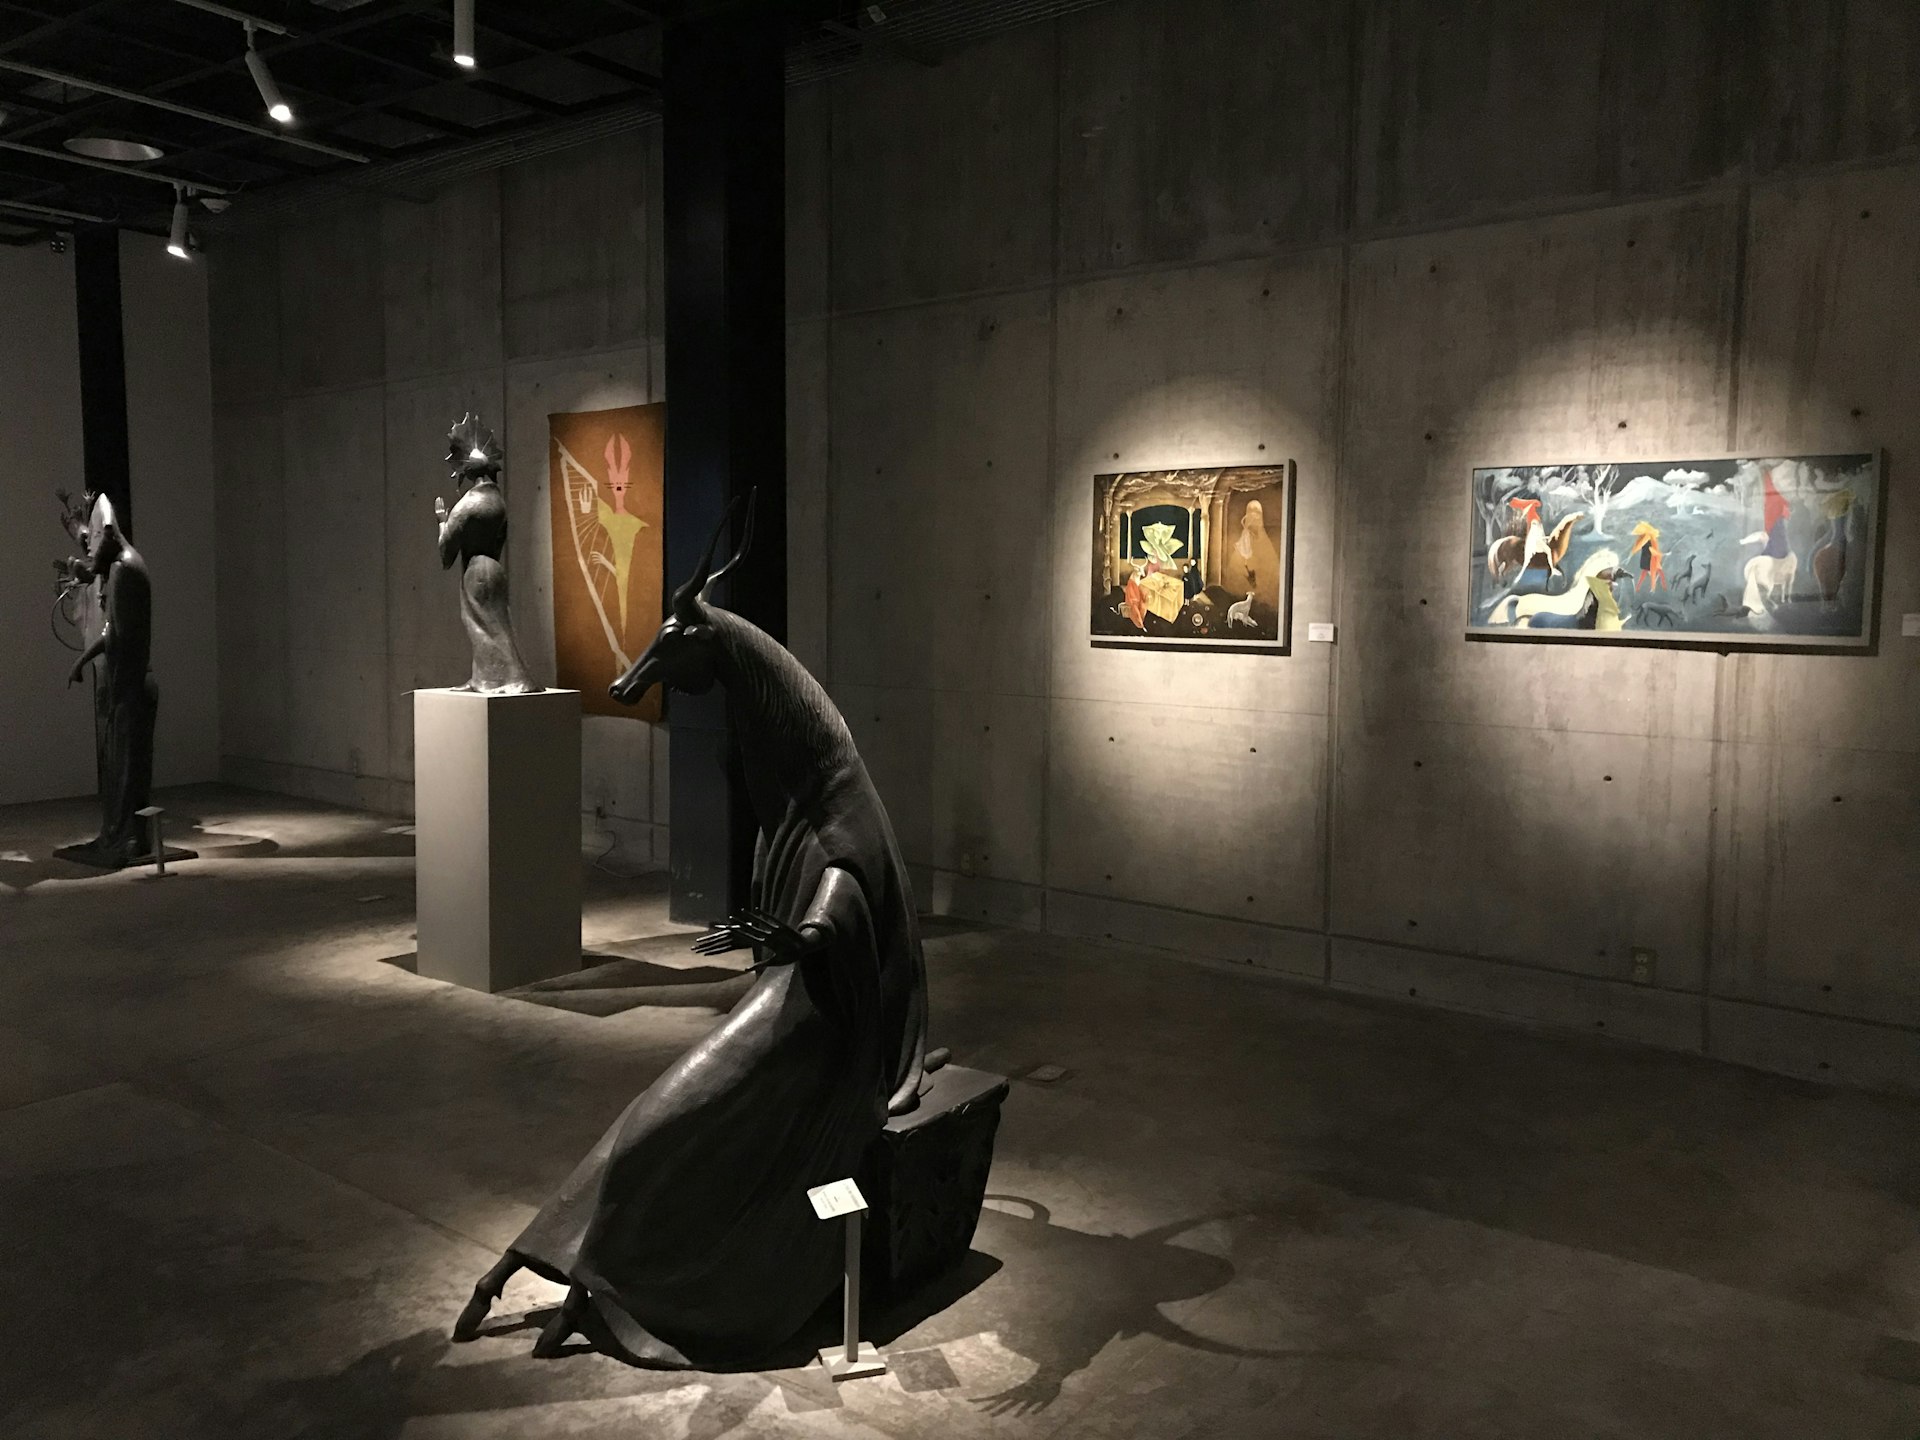 Surrealist paintings hang on the walls of a cement room with bronze sculptures in the foreground